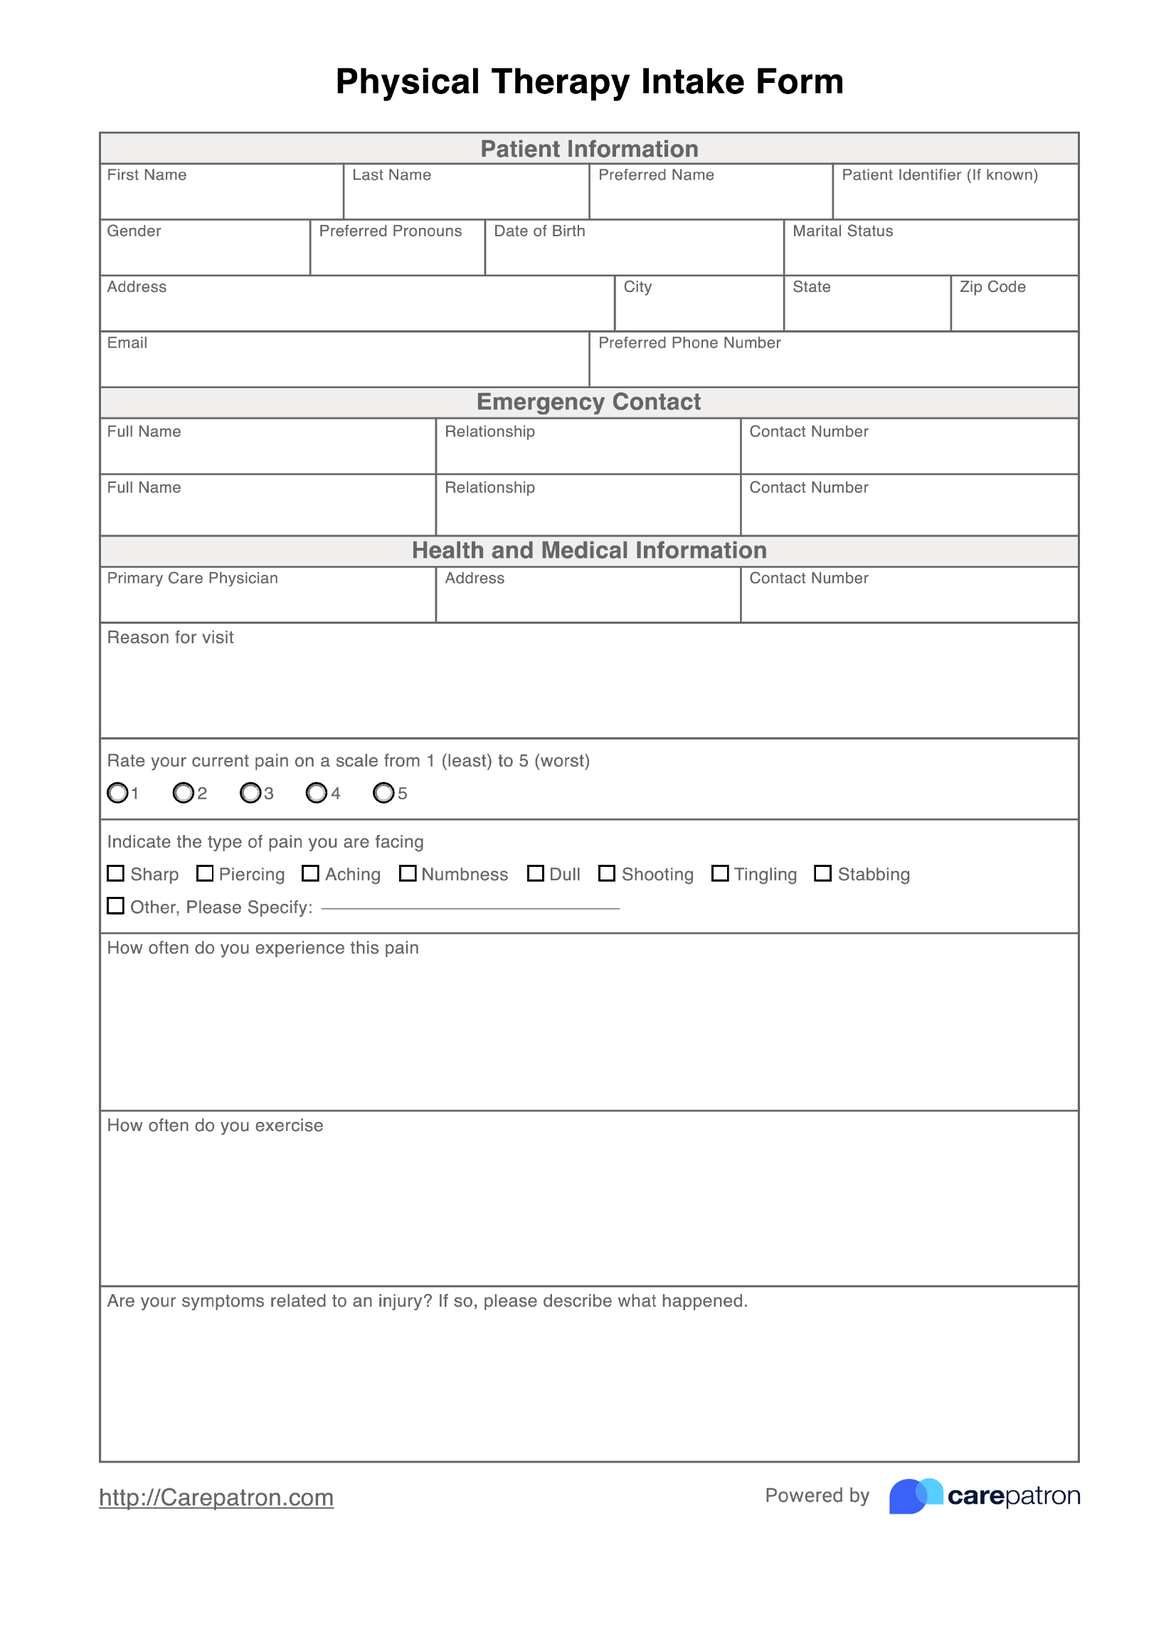 Physical Therapy Intake Form PDF Example